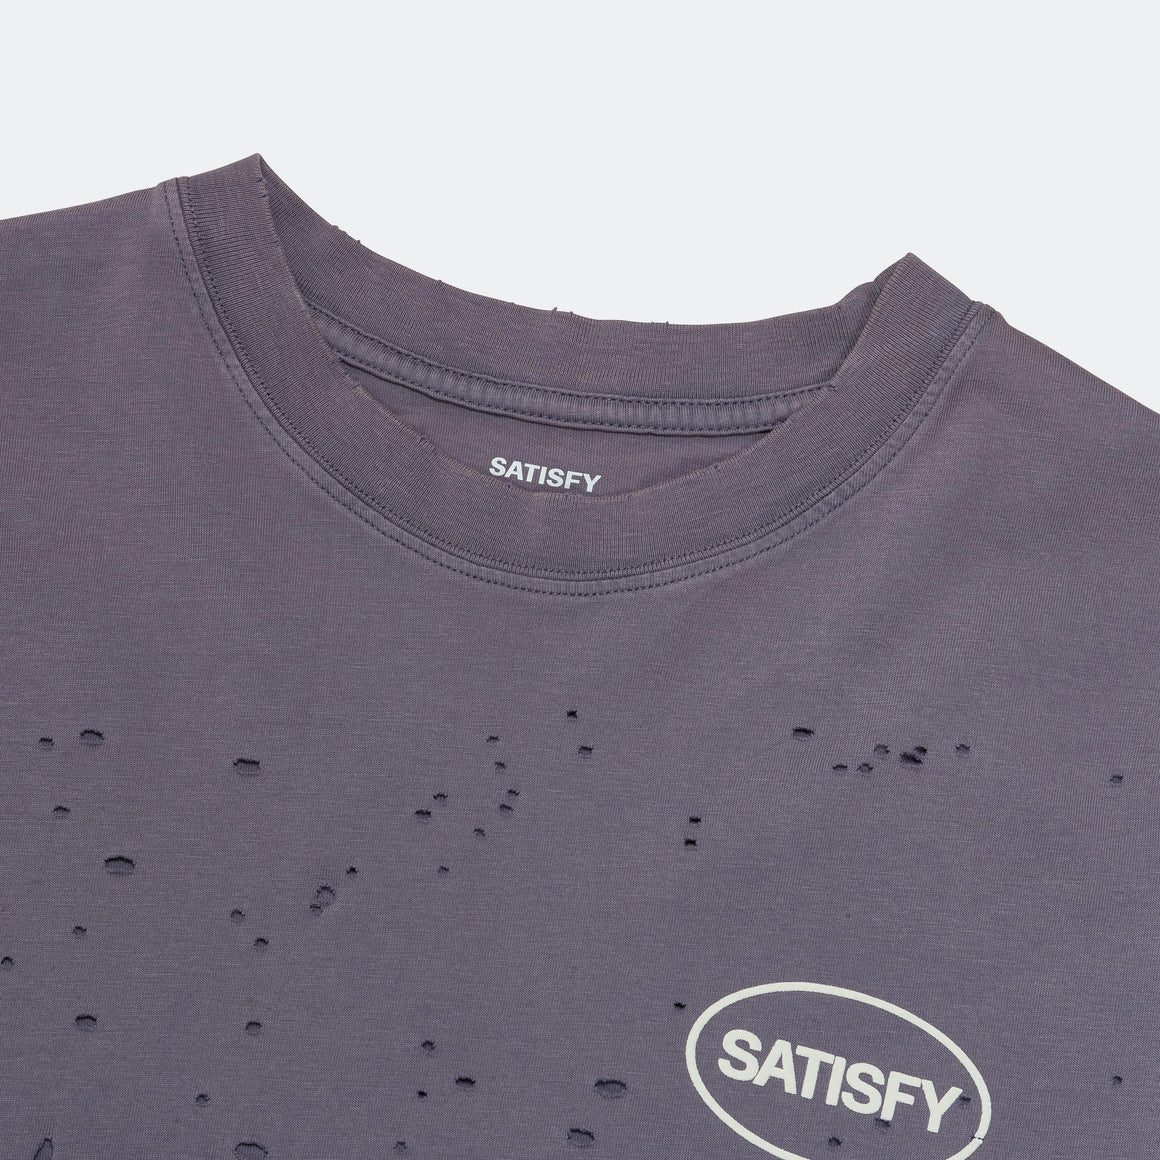 Satisfy - Mens MothTech™ T-Shirt - Aged Purple Sage - Up There Athletics